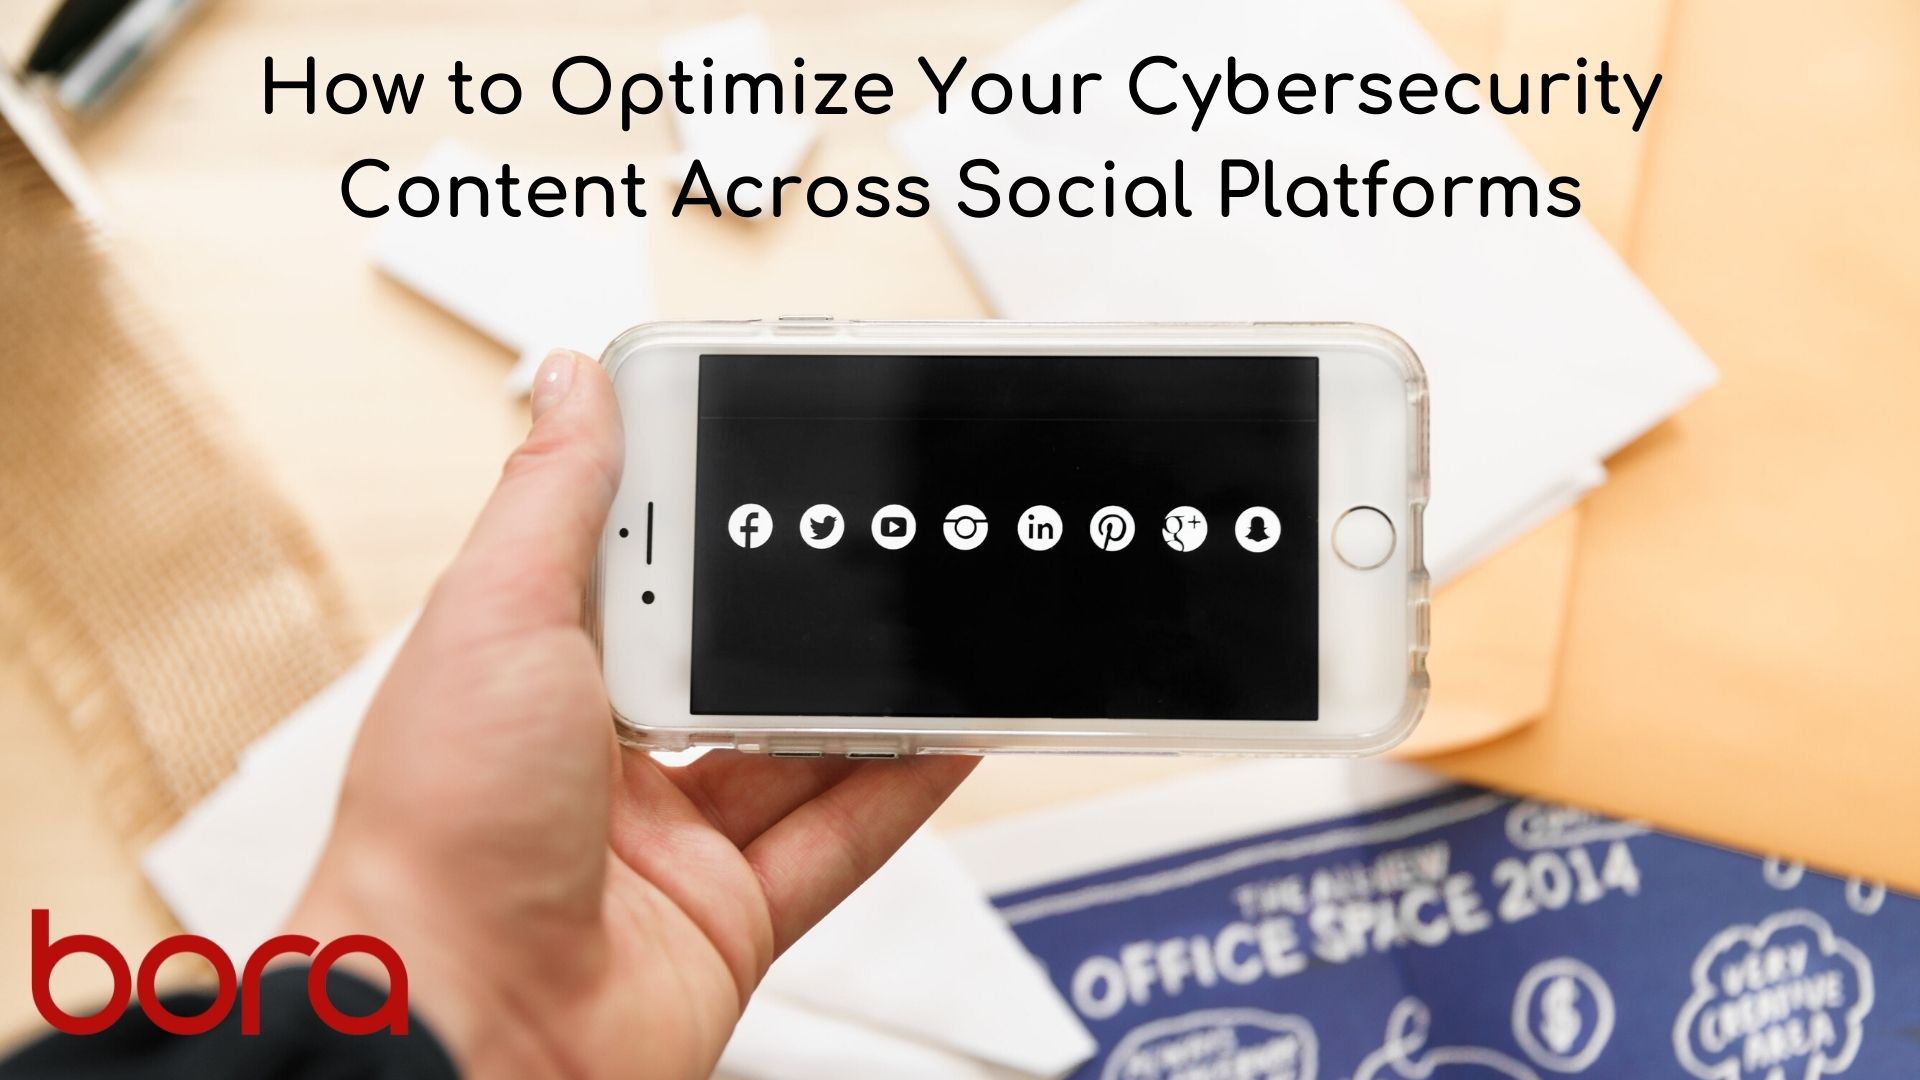 How to Optimize Your Cybersecurity Content Across Social Platforms